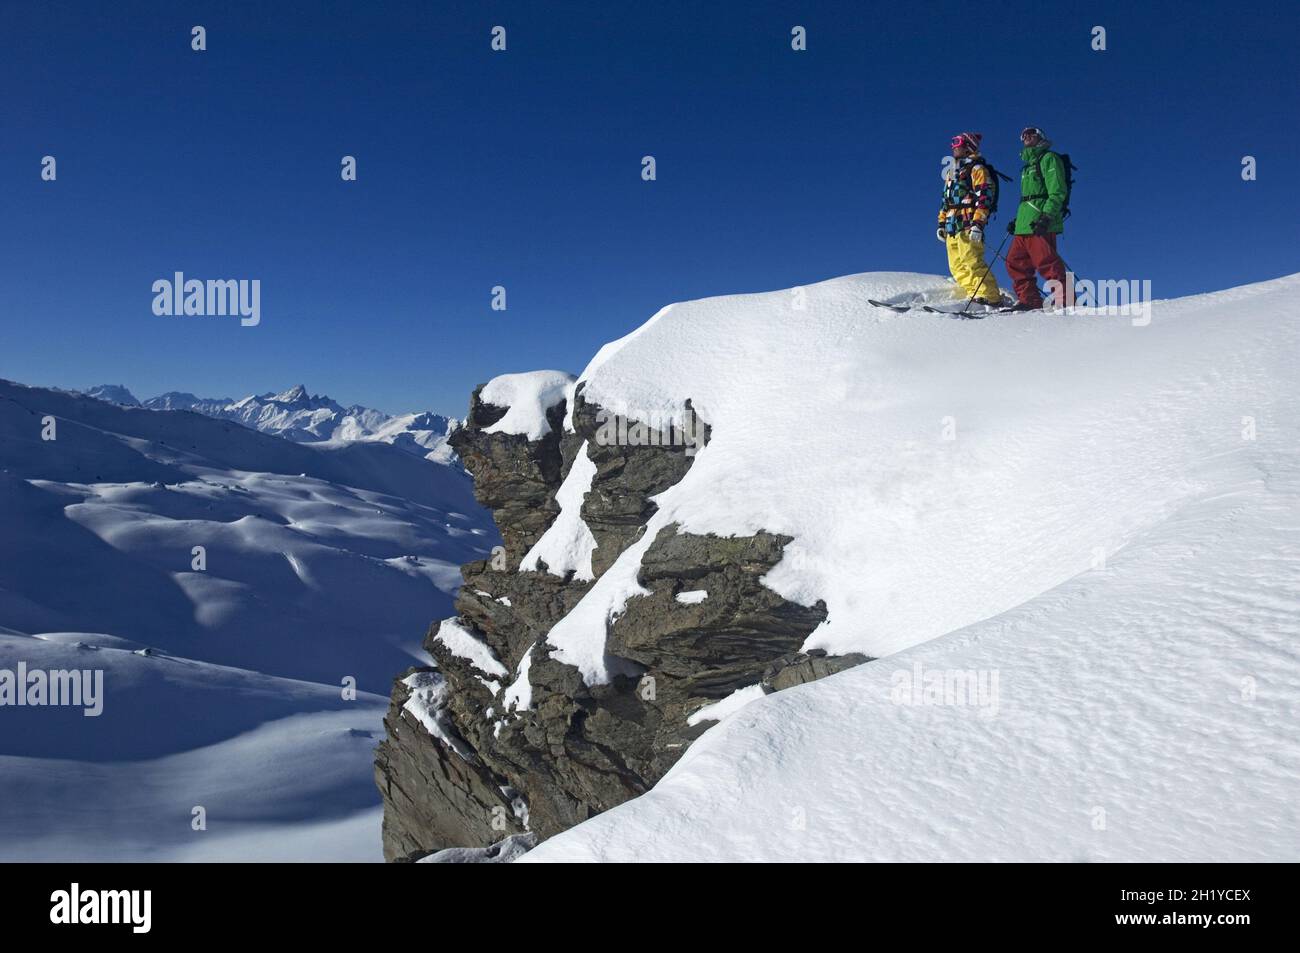 SKIERS PRACTICING OFF-PISTE SKIING ON A ROCKY OUTCROP, LES MENUIRES, THE 3 VALLEES SKI AREA, ALPS, SAVOY (73), FRANCE Stock Photo